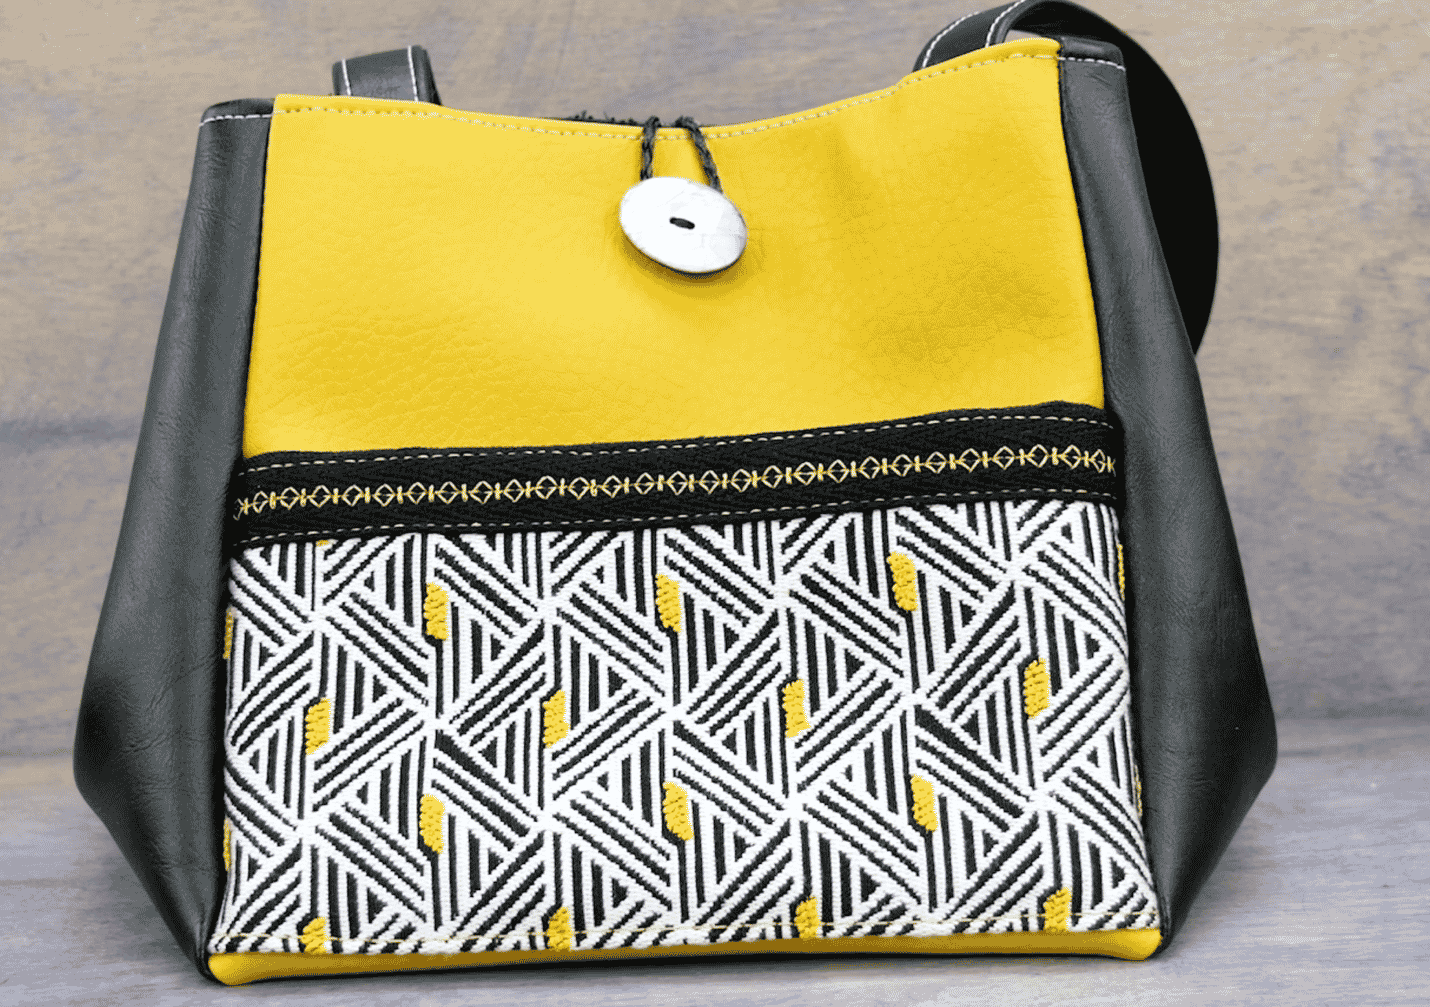 A black and yellow bag Description automatically generated